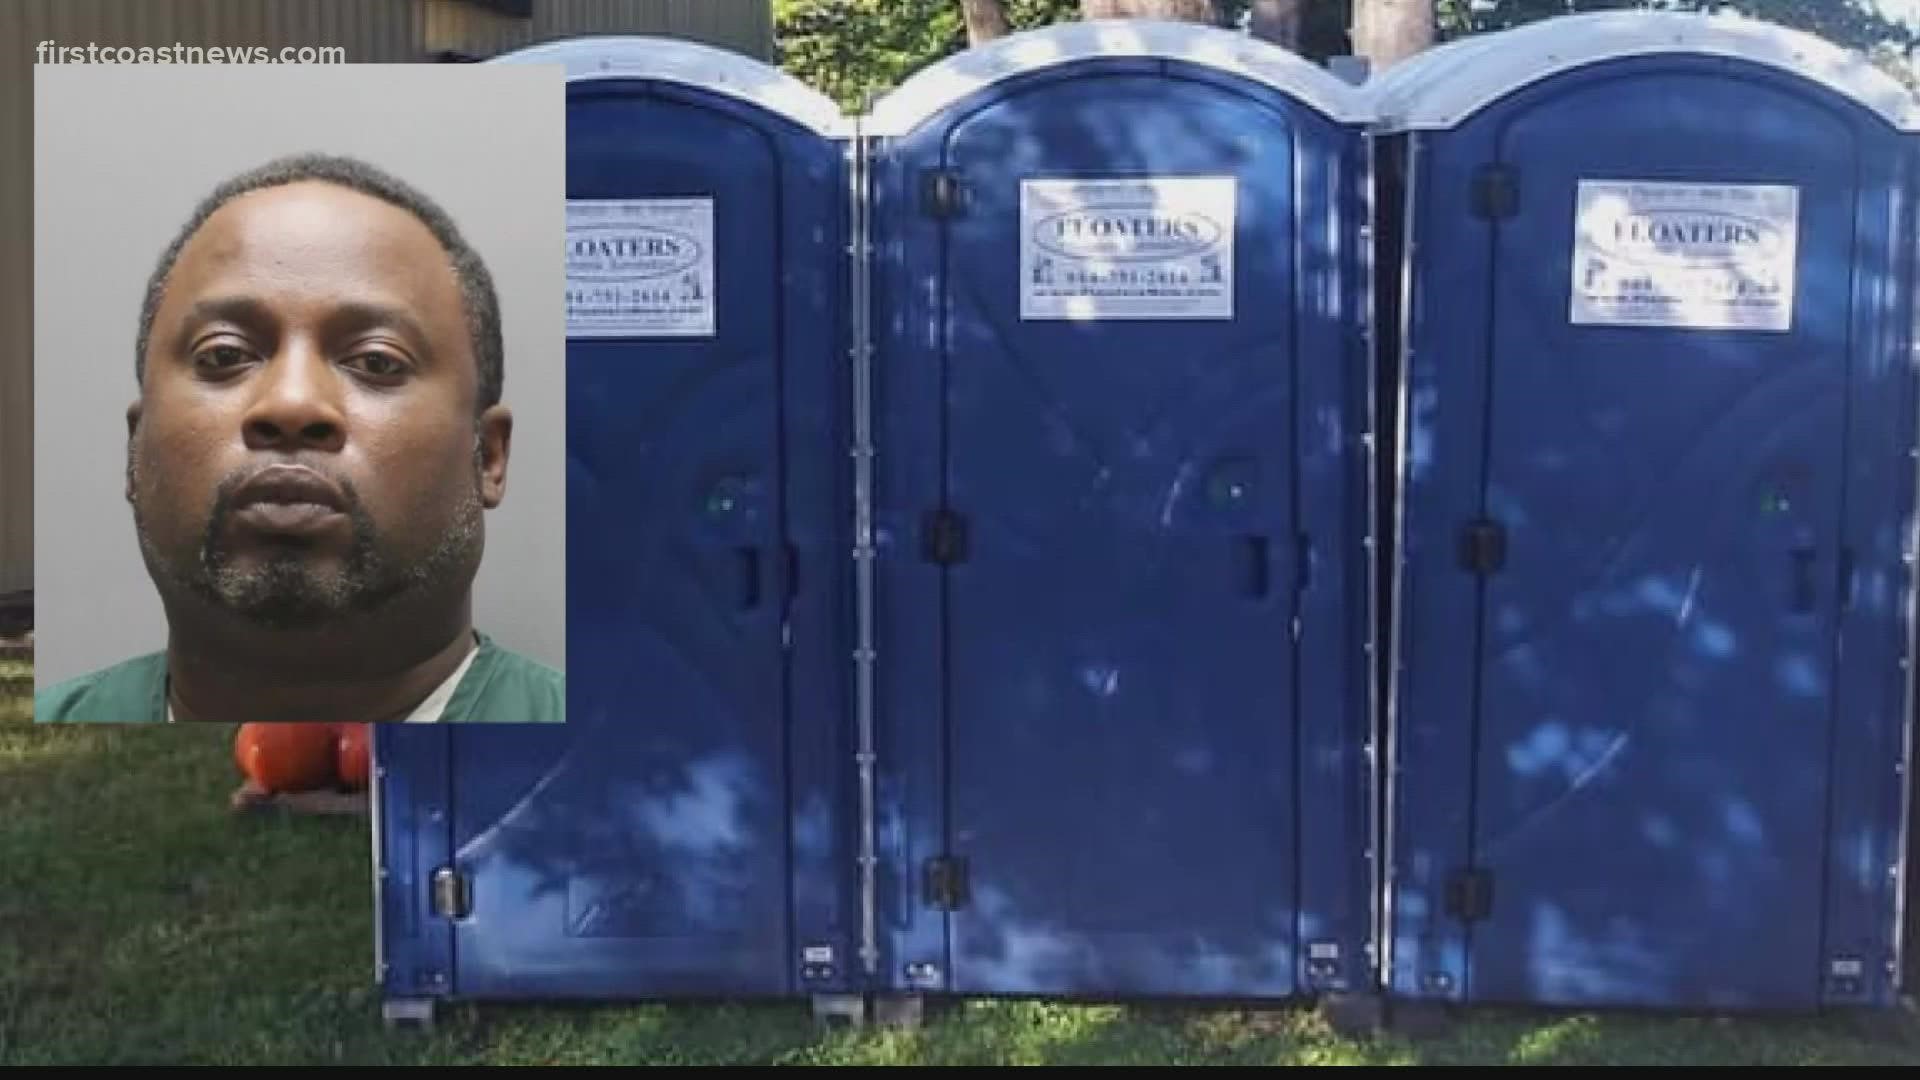 'The smell of urine was overpowering': Despite confession, high-profile raw sewage dumping case ends with minimal punishment.